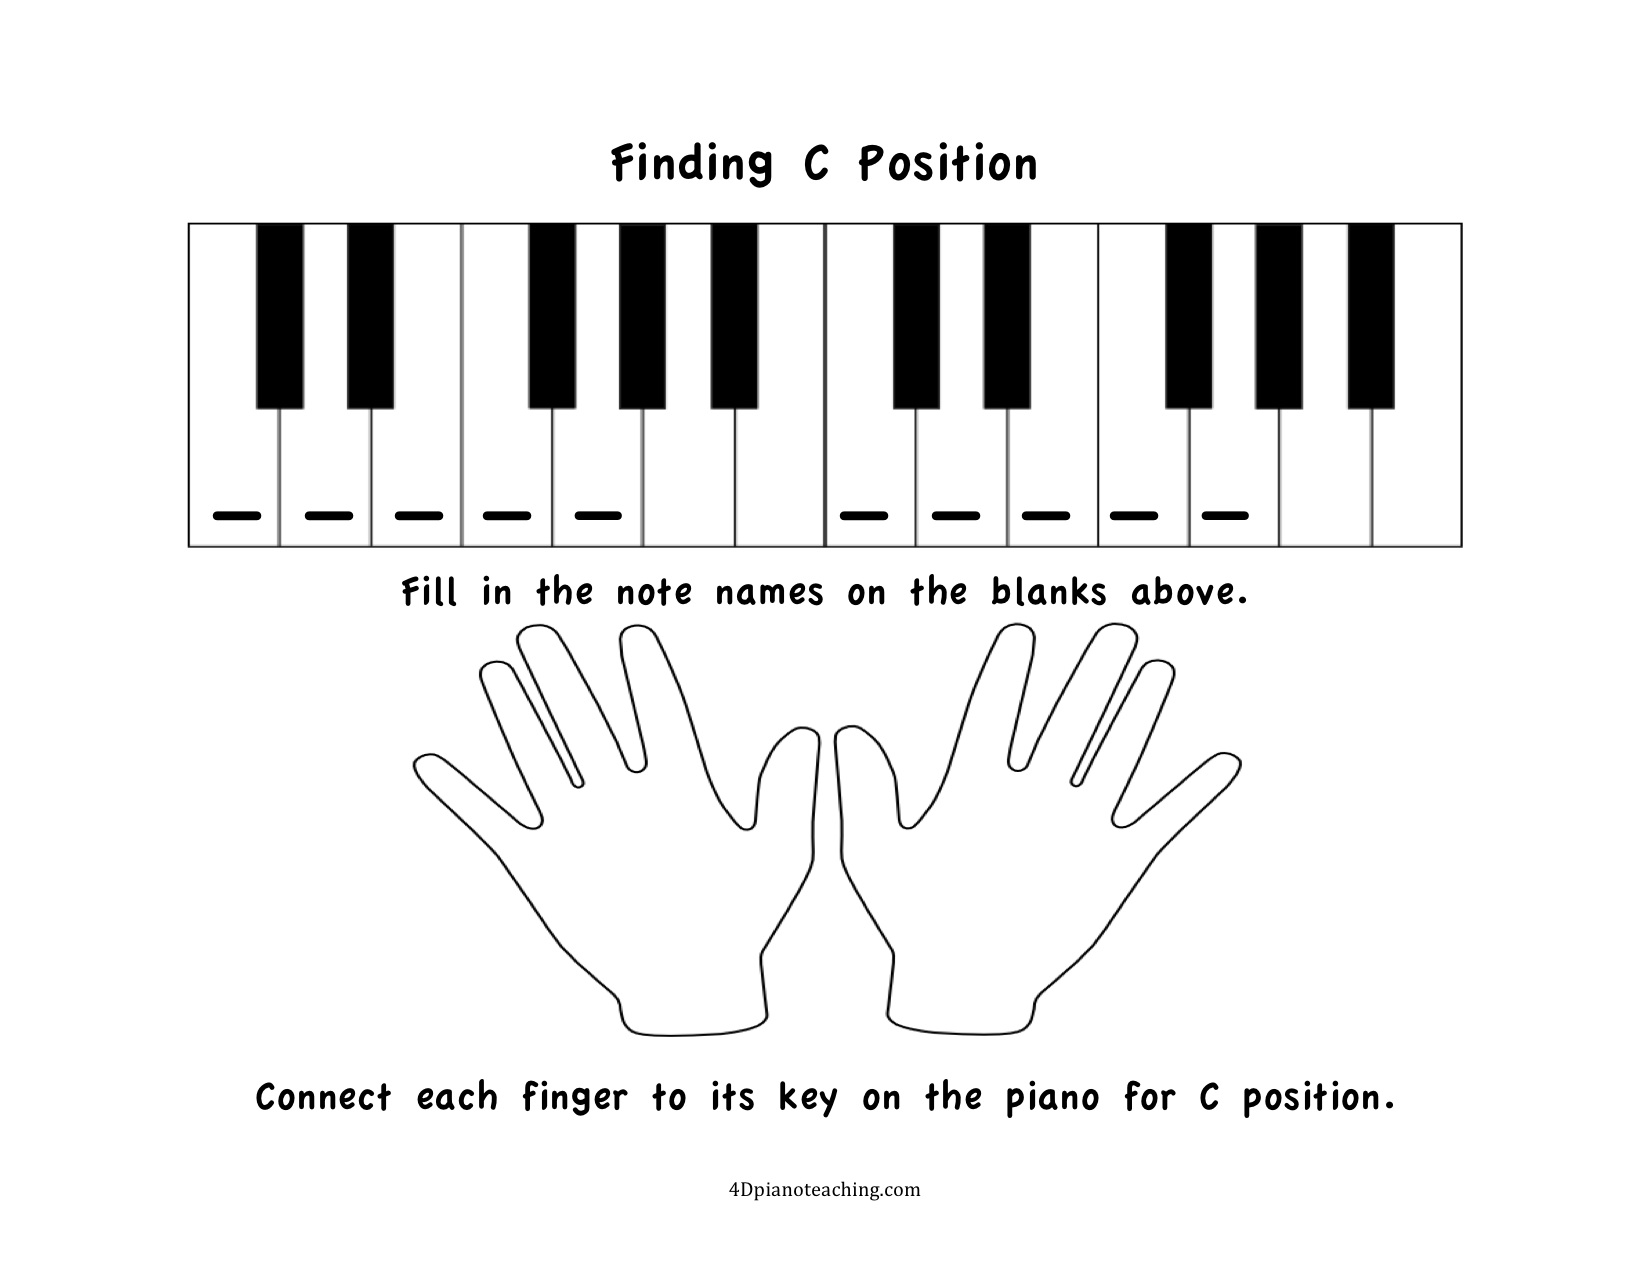 free-printables-c-position-worksheets-4dpianoteaching